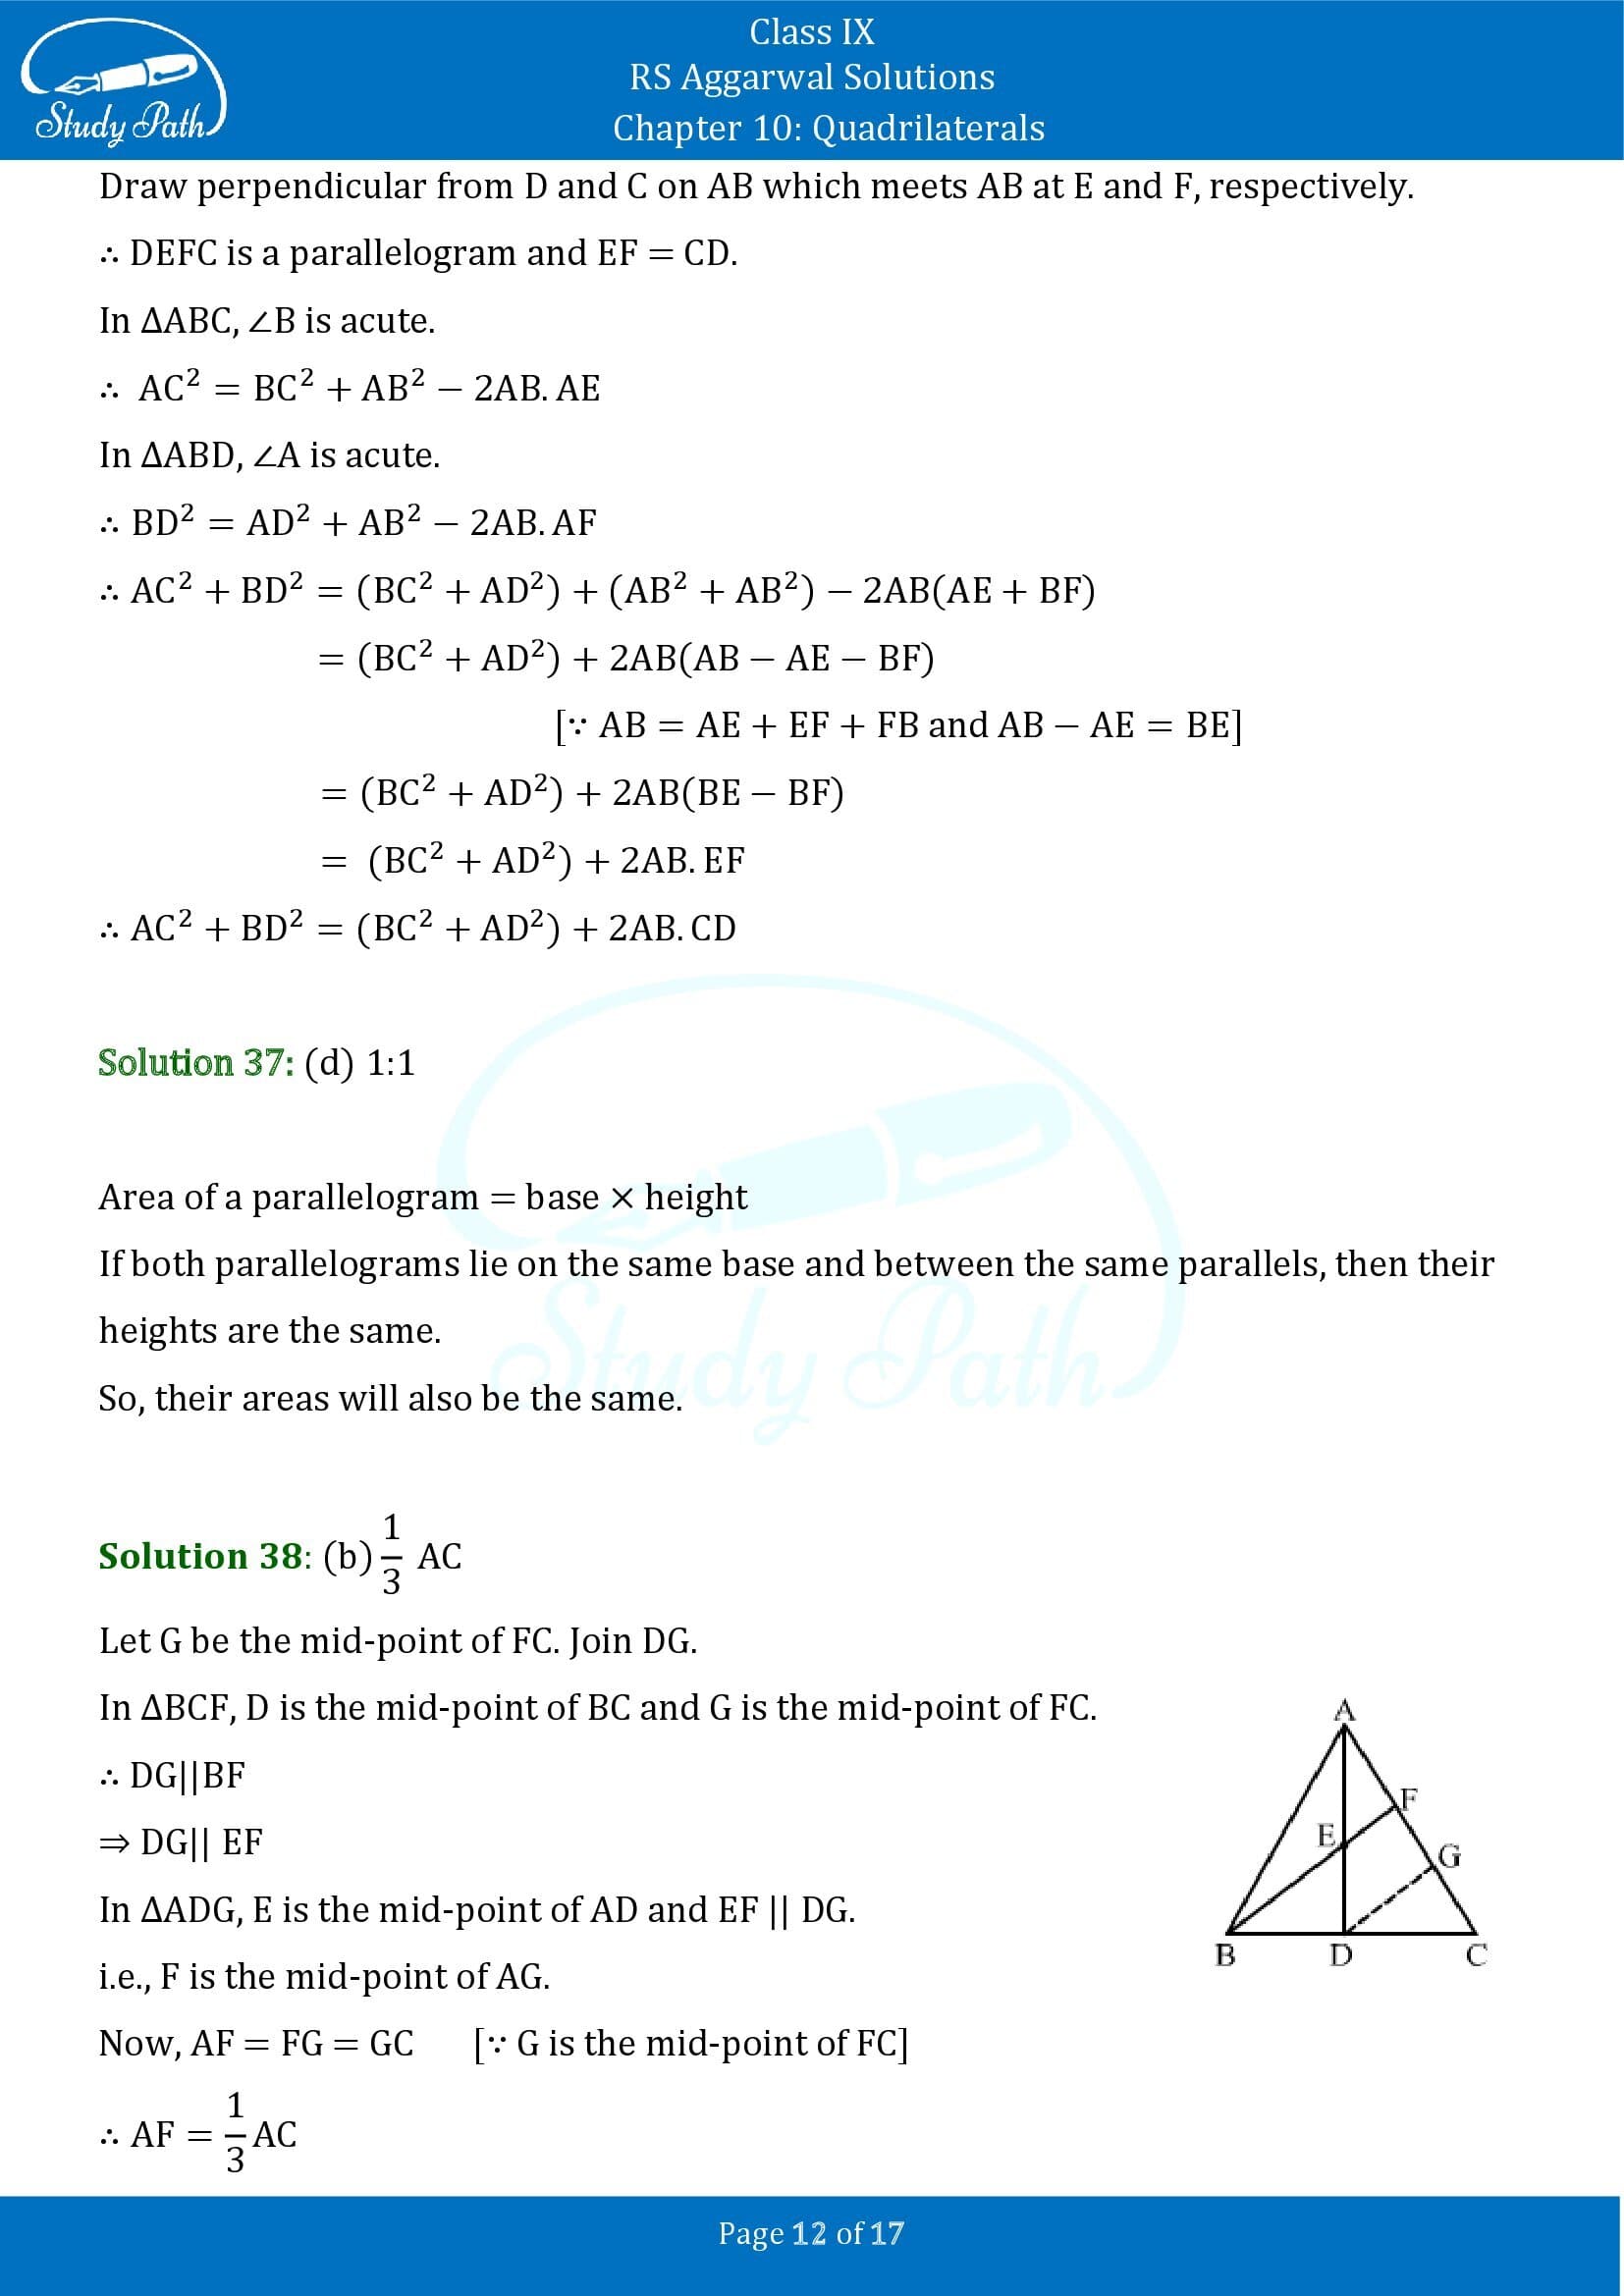 RS Aggarwal Solutions Class 9 Chapter 10 Quadrilaterals Multiple Choice Questions MCQs 00012